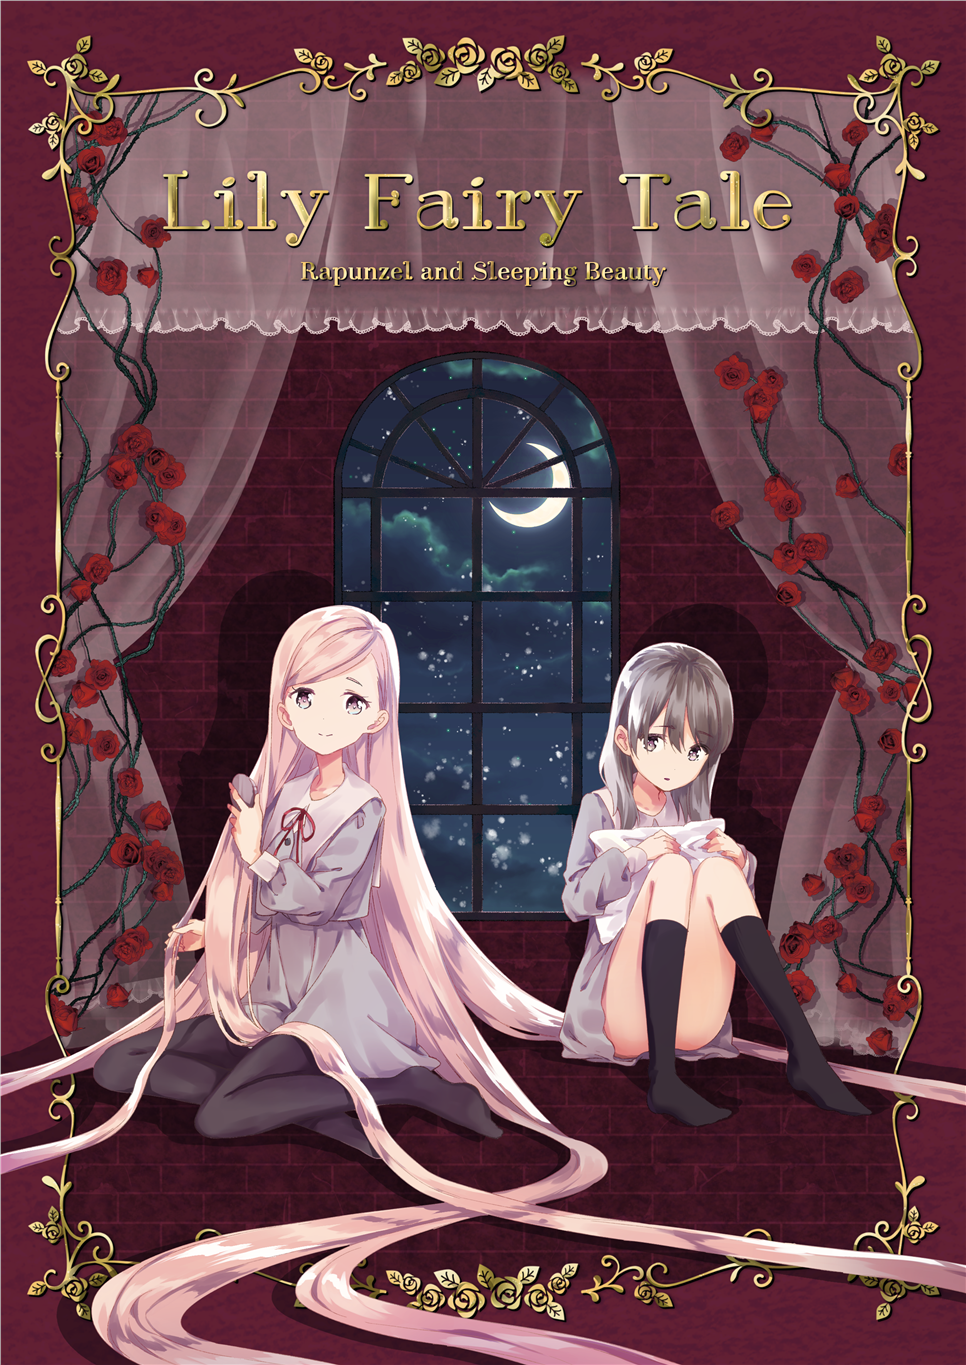 Lily Fairy Tale -Rapunzel and Sleeping Beauty-